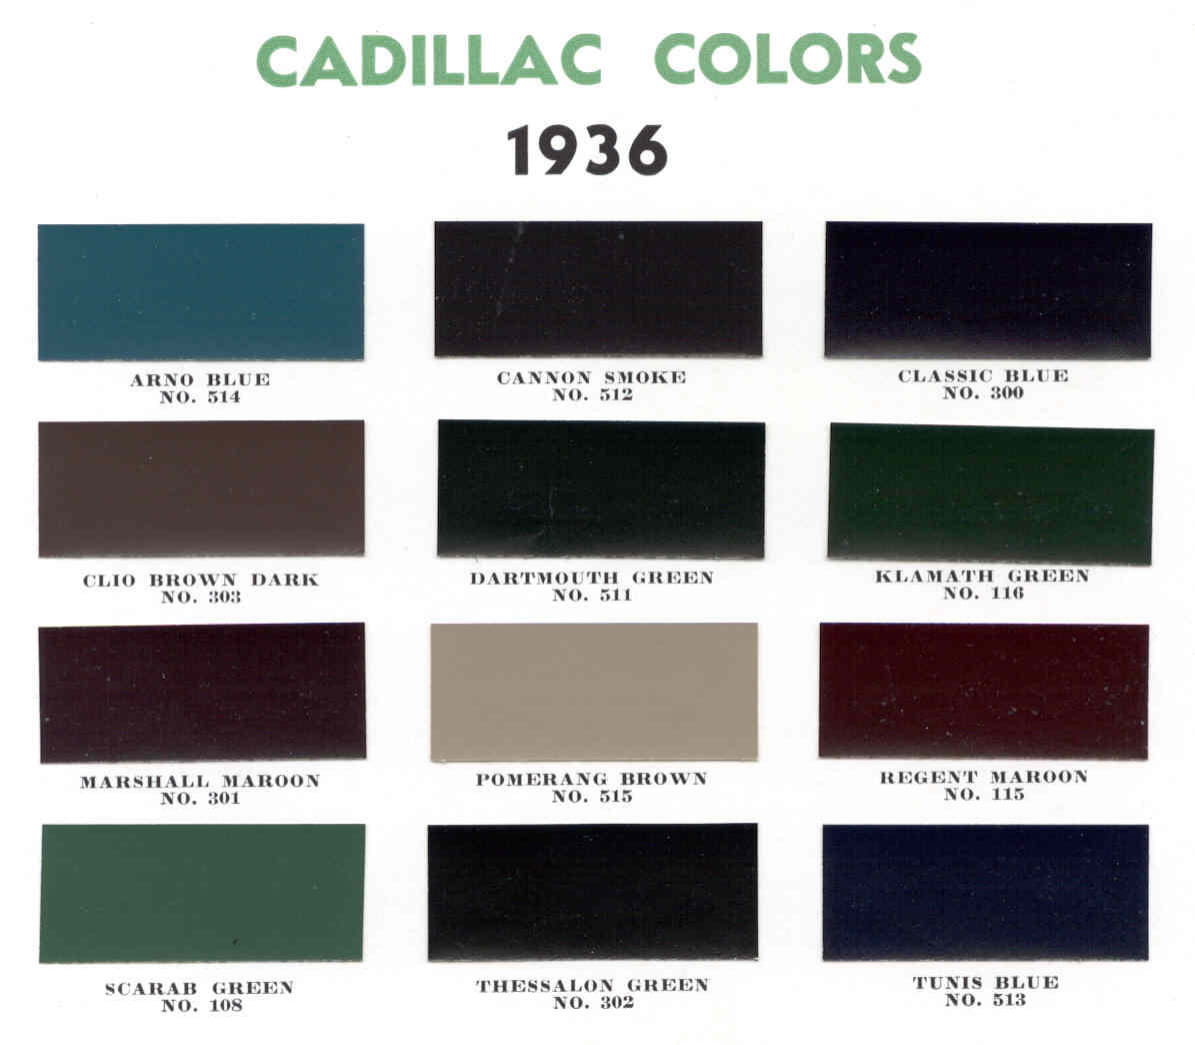 Colors and Codes used on the Exterior of Cadillacs in 1936